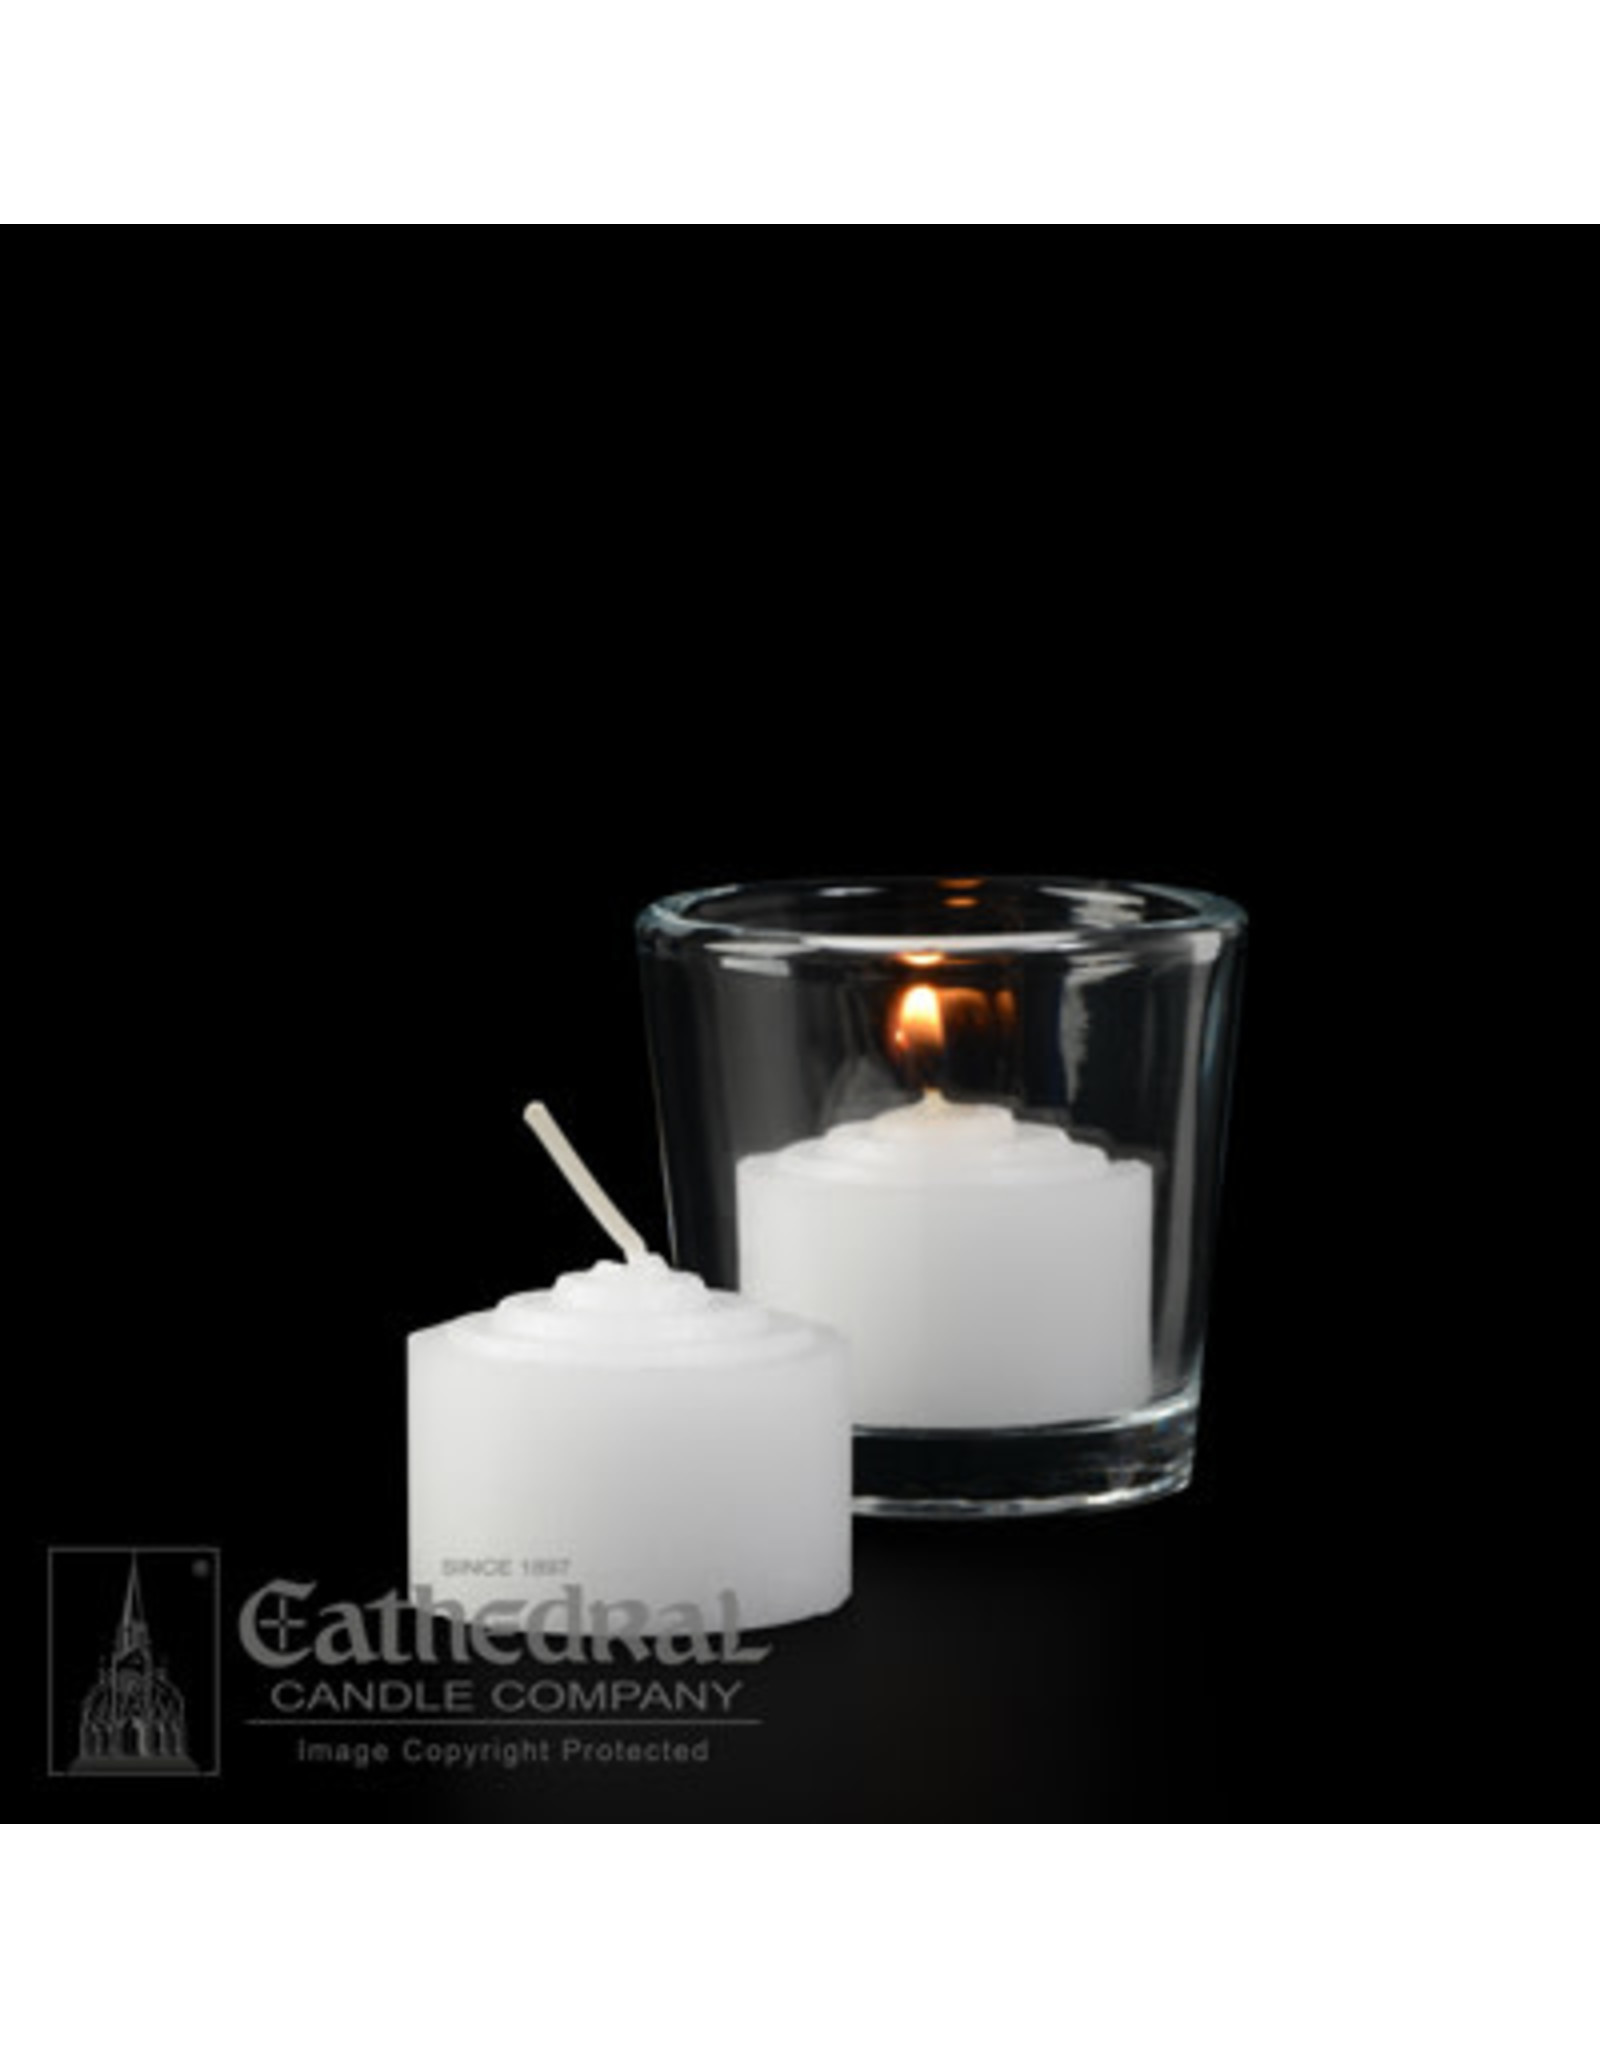 Cathedral Candle 6-Hour Votive Candles (Box of 144)